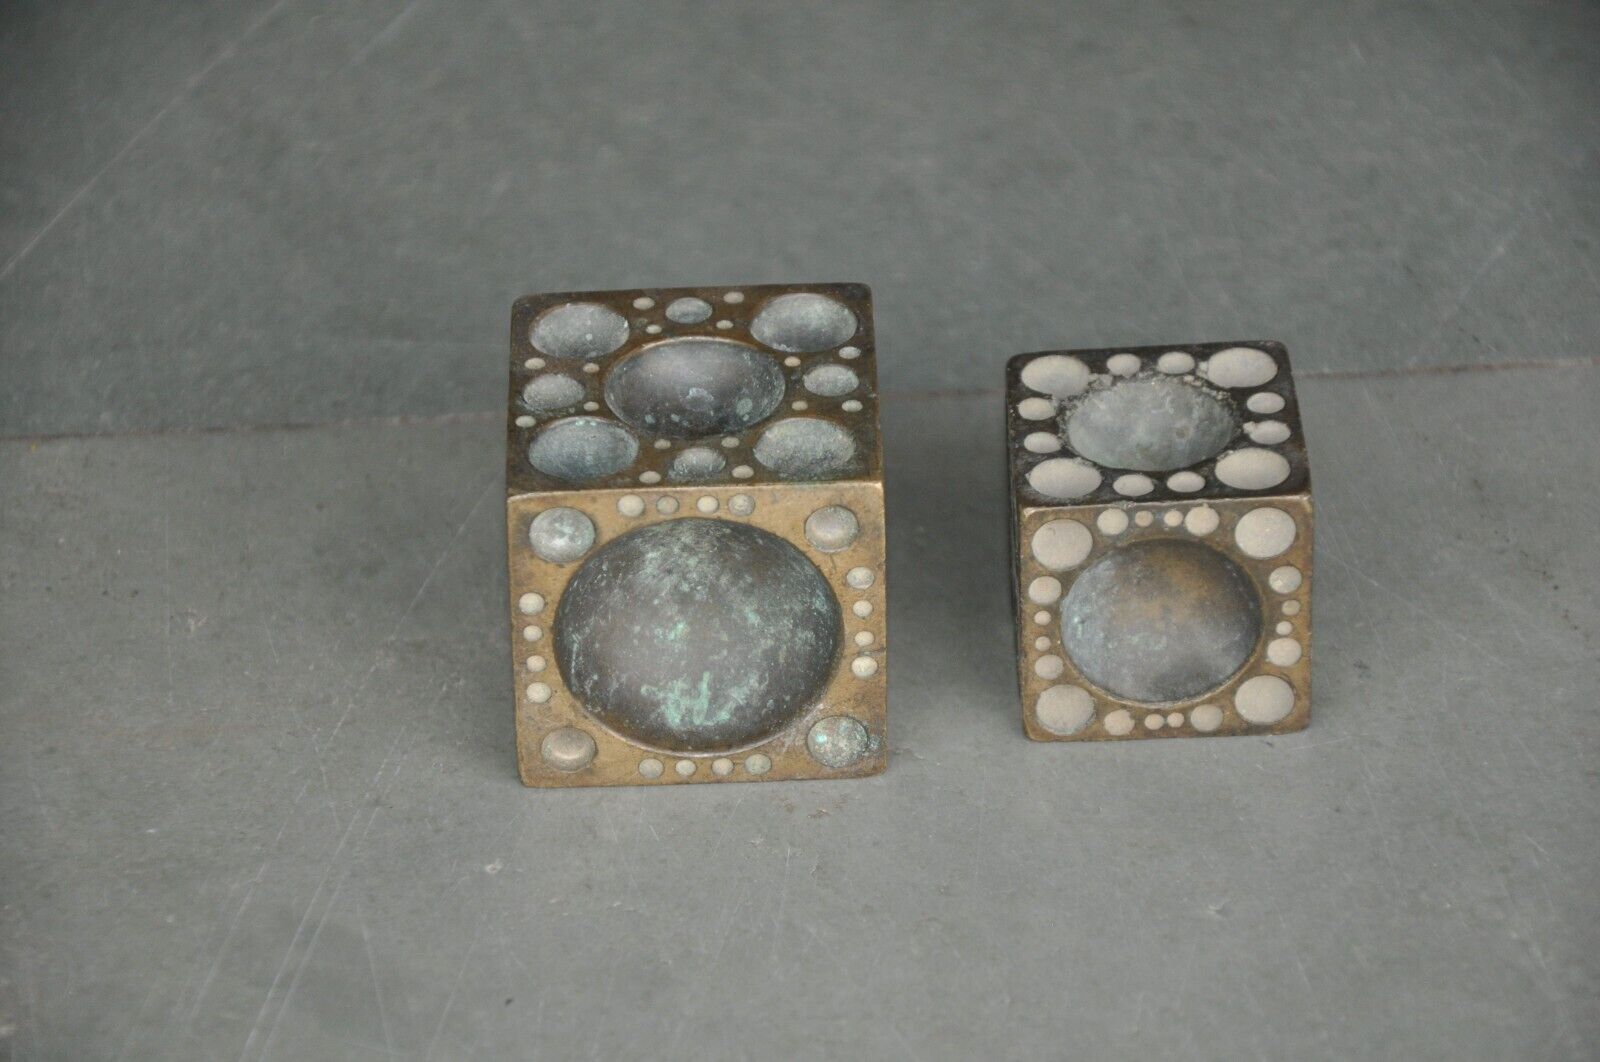 2 Pc Vintage Brass Casted Round Holes Engraved Cube Shape Dye / Seal / Stamp